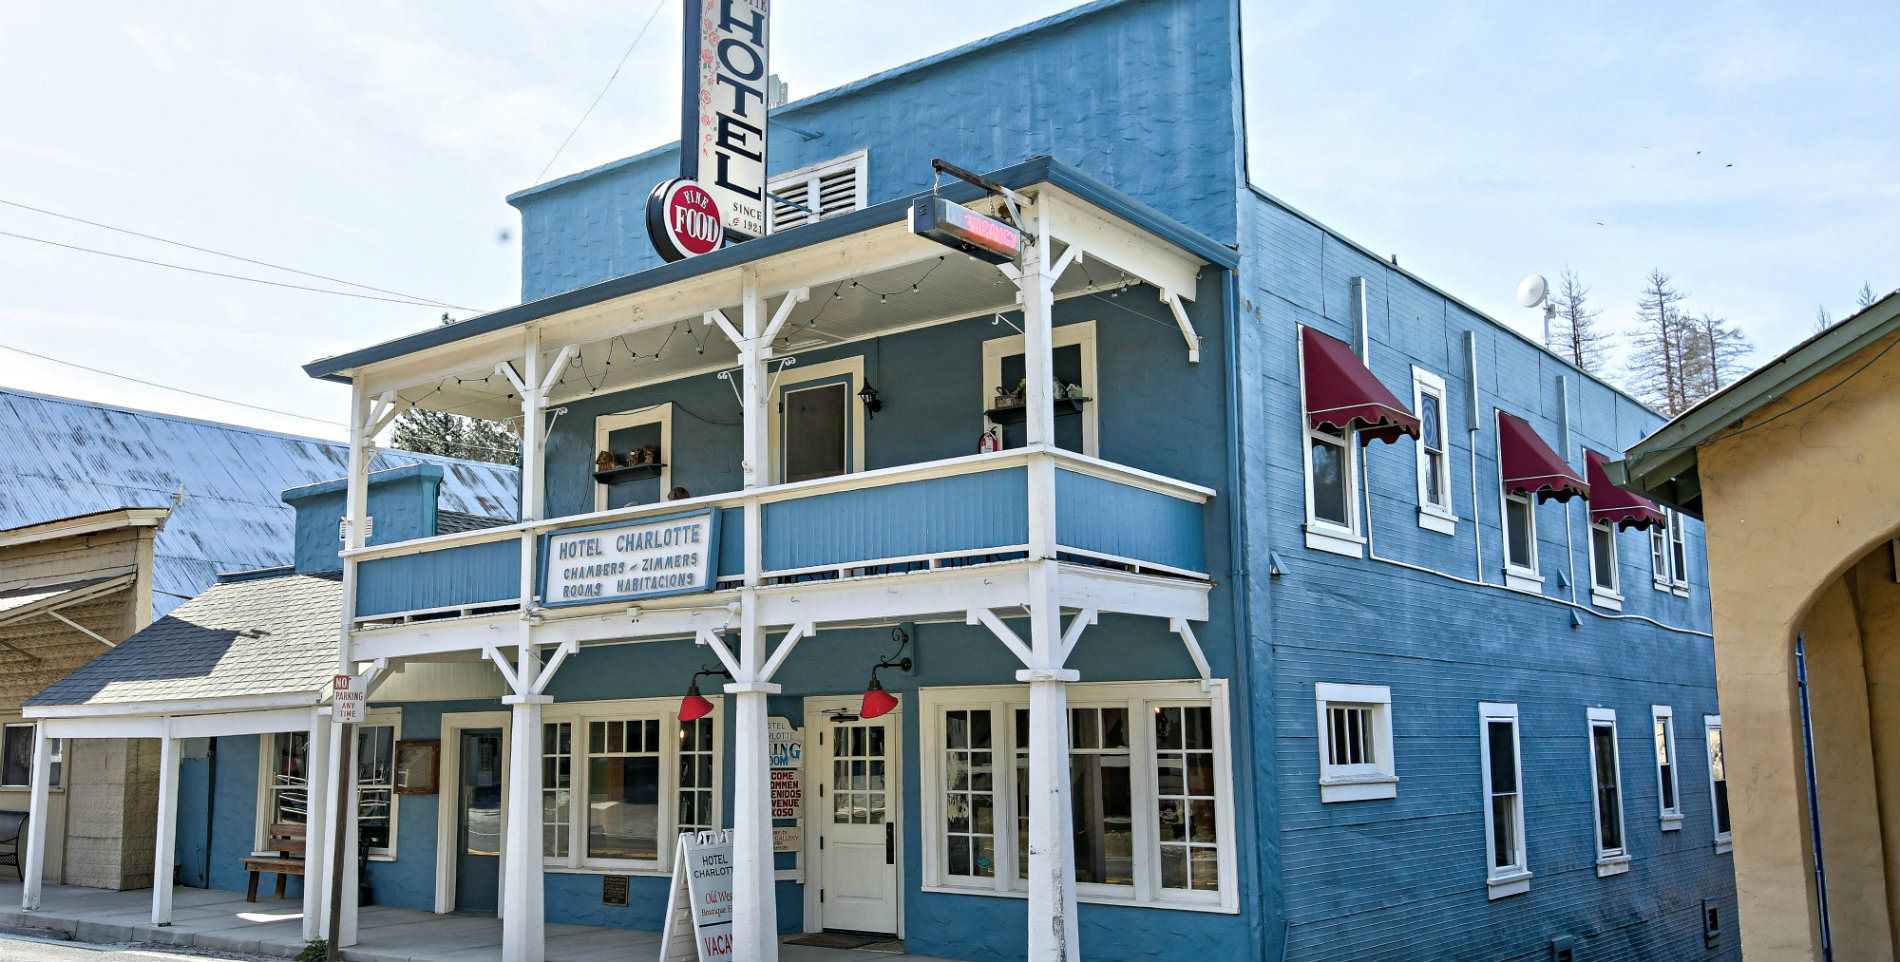 street view of the two story sky blue painted hotel with second story balcony with white trim and burgundy window awnings on the side